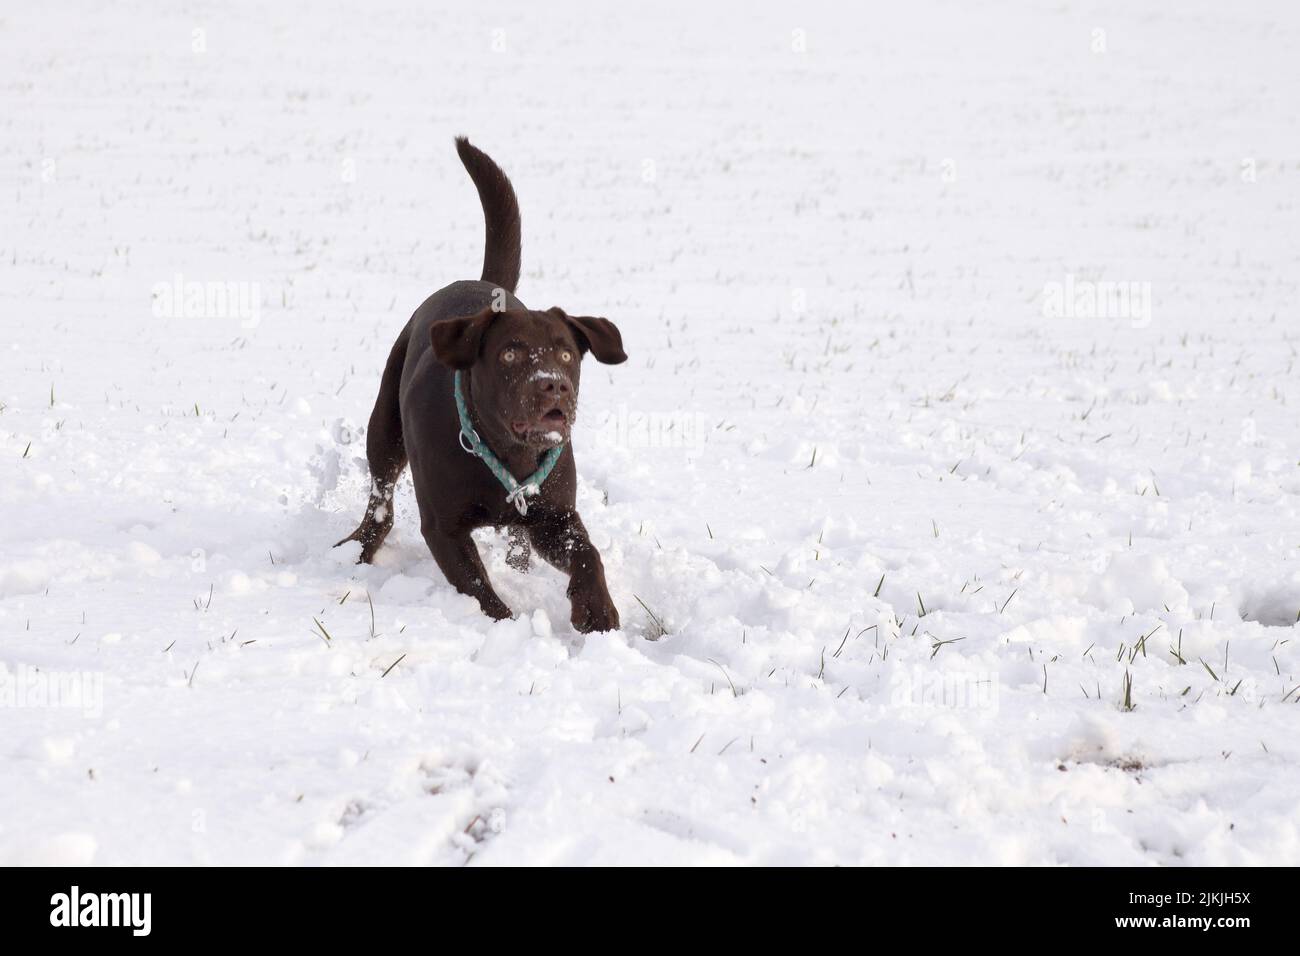 A brown lobrador dog playing in a snow-covered field Stock Photo